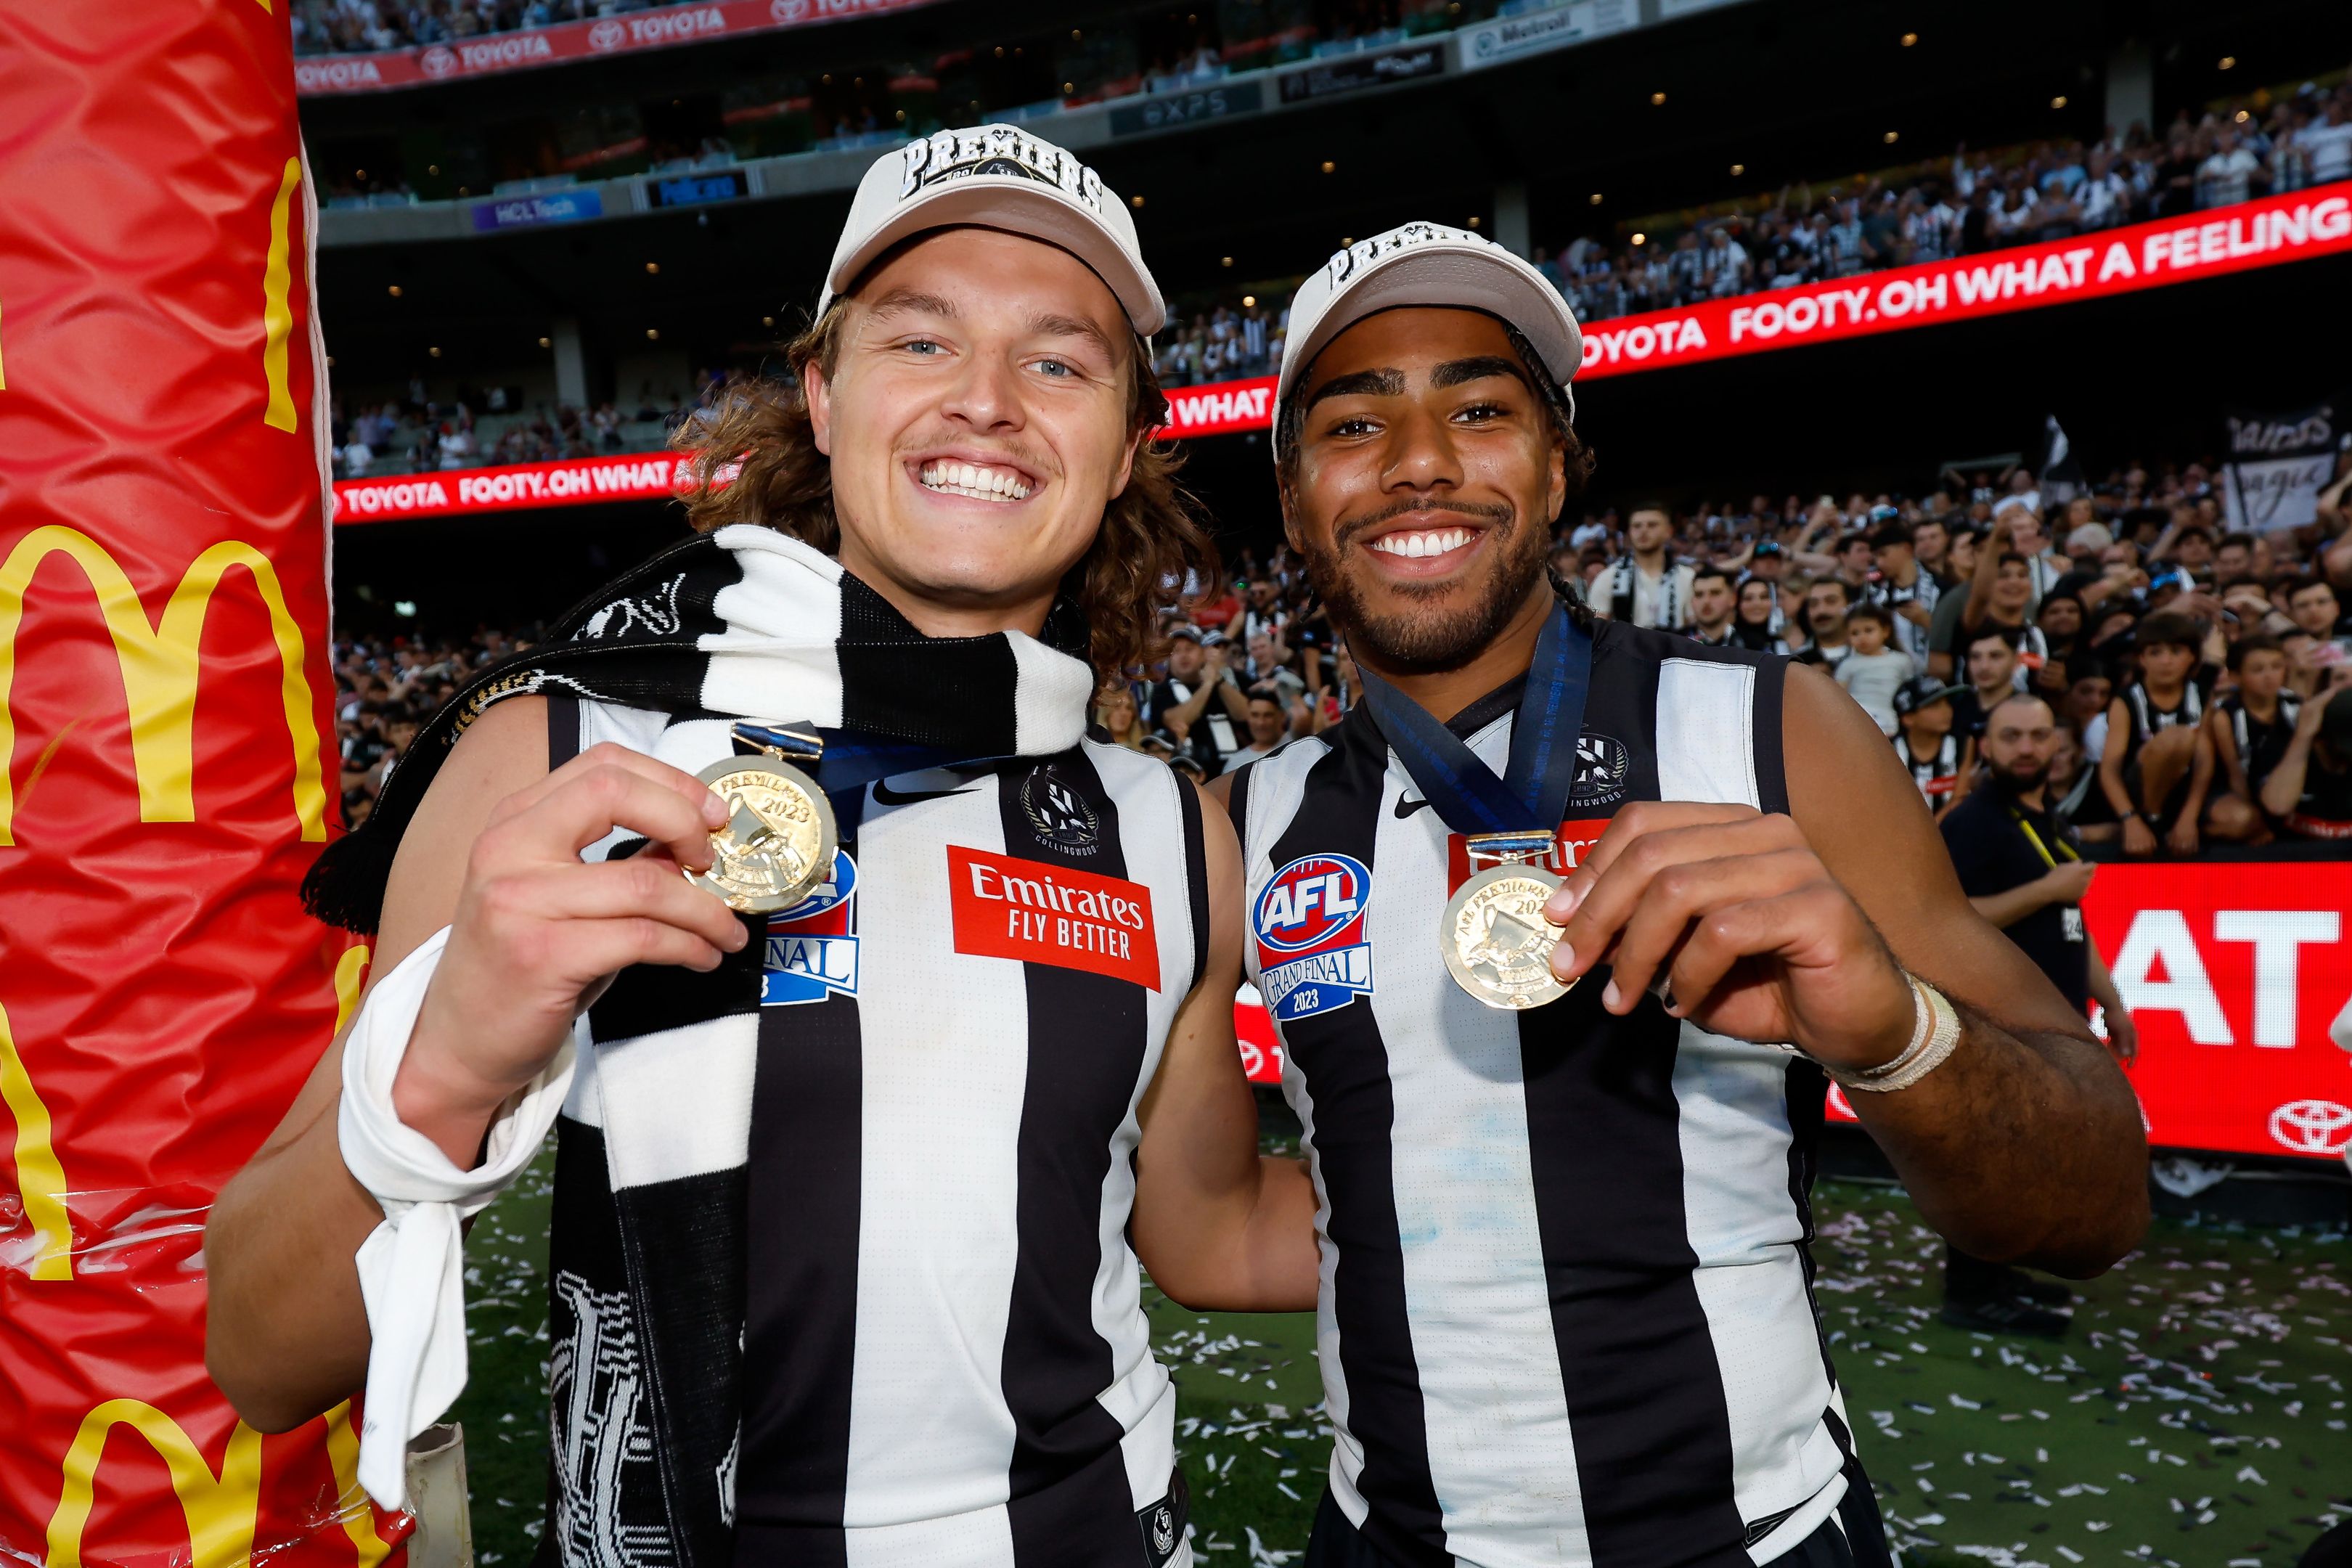 Collingwood pushes to be awarded AFL's first premiership rings as league considers radical proposal